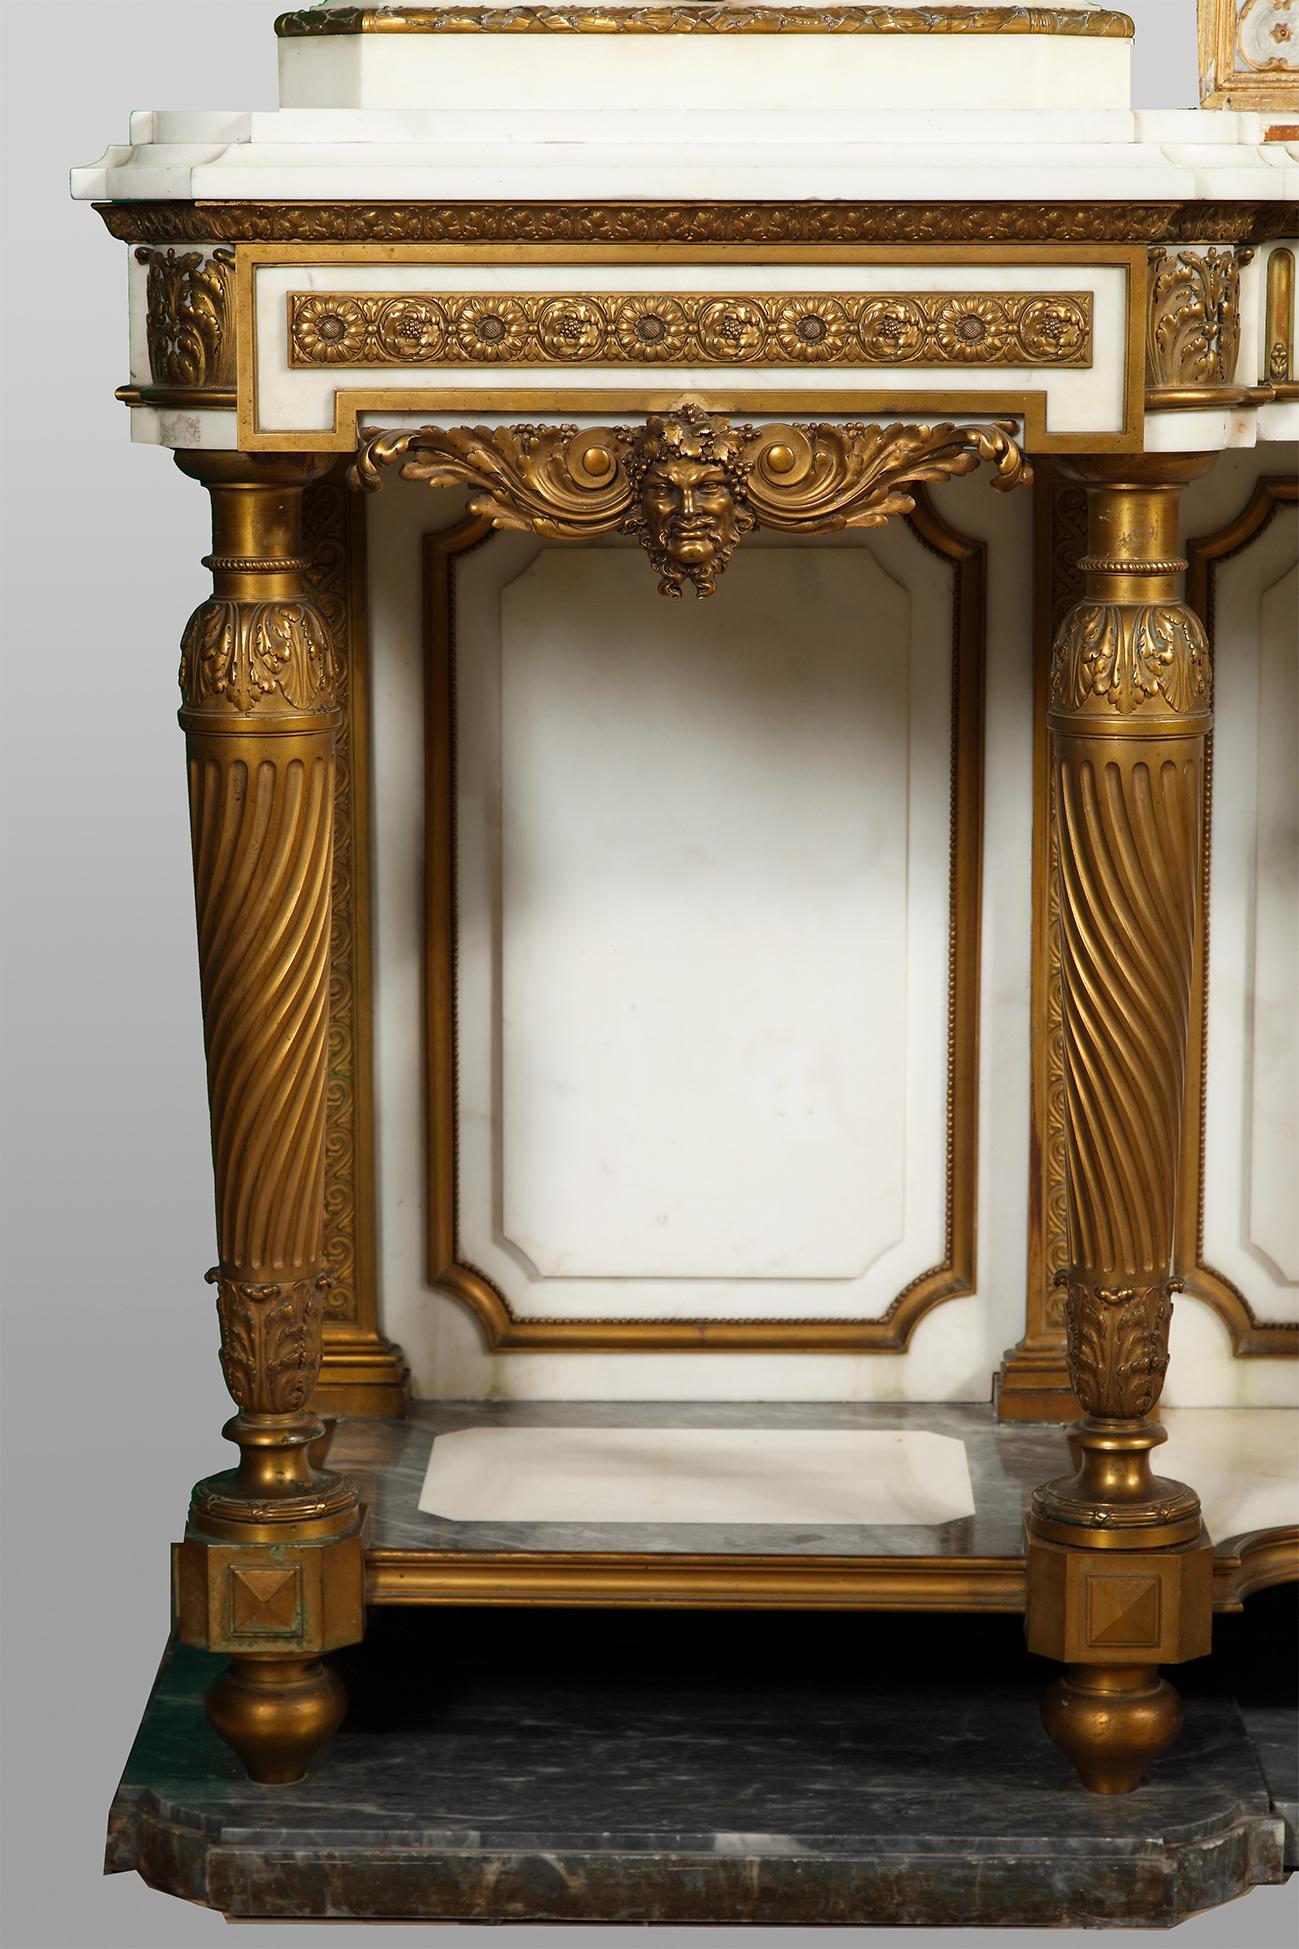 Magnificent Console by Barbedienne, Falguière and Dubois, France, Circa 1880 For Sale 1